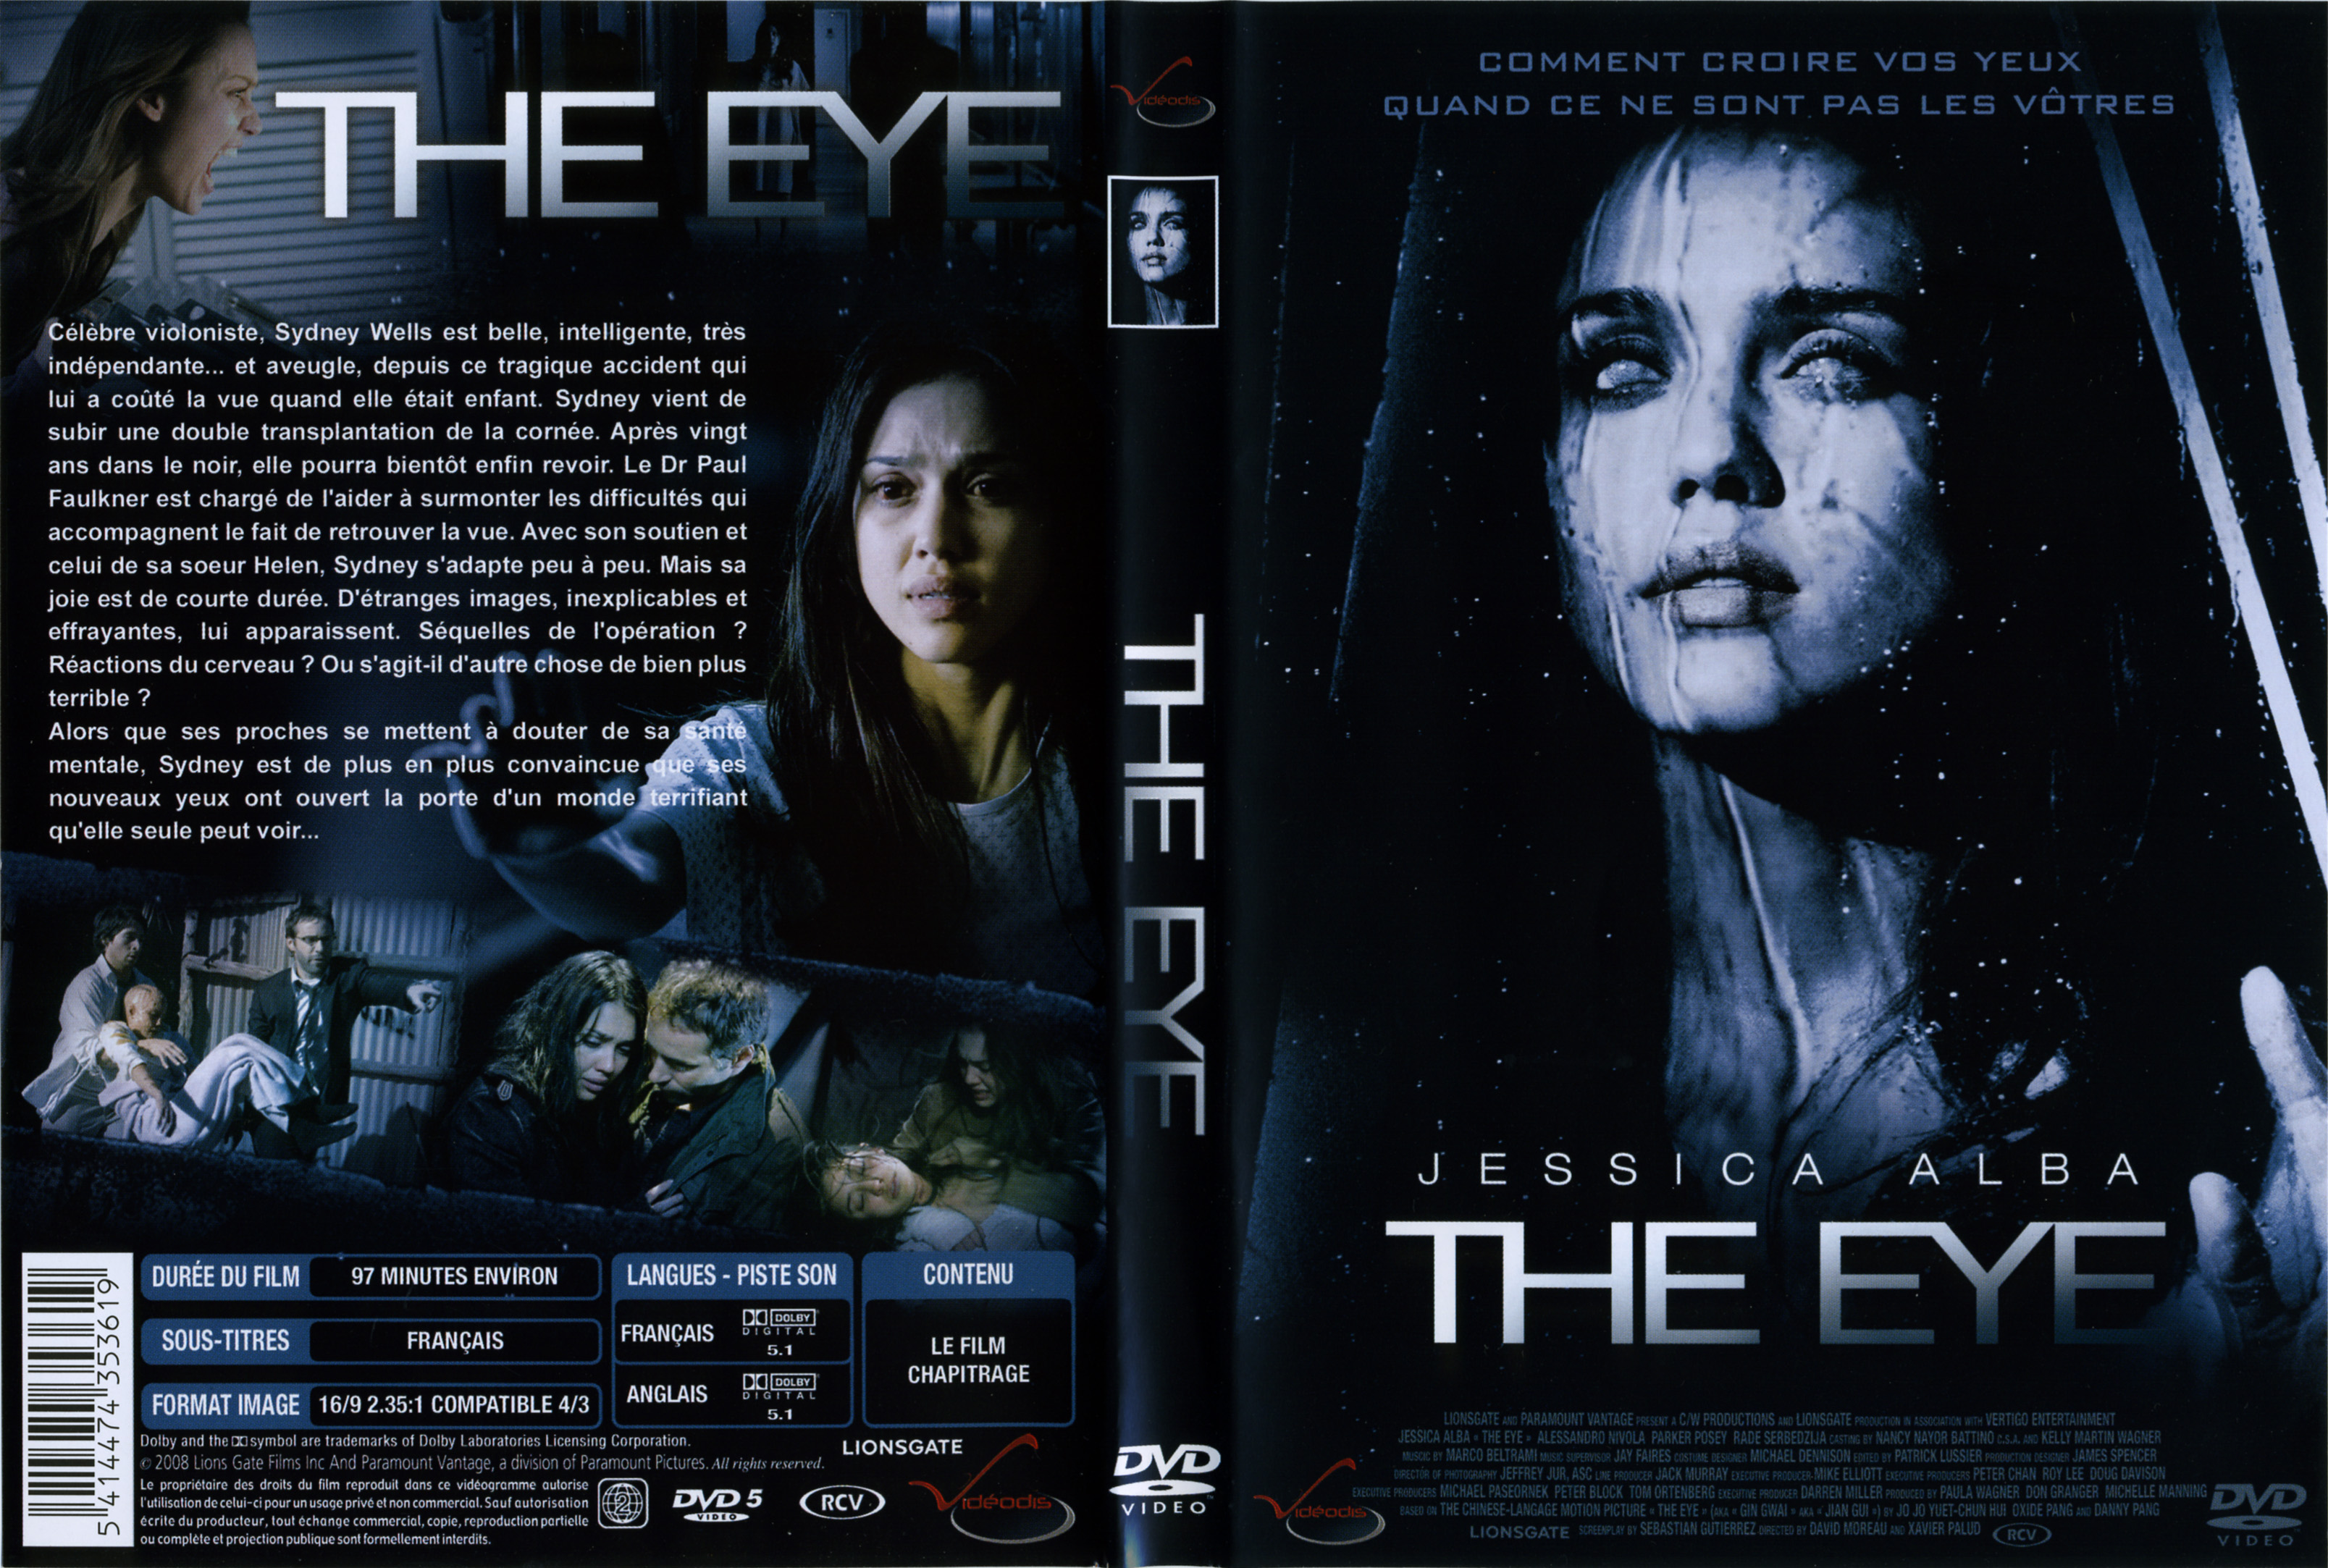 Jaquette DVD The eye (2008)